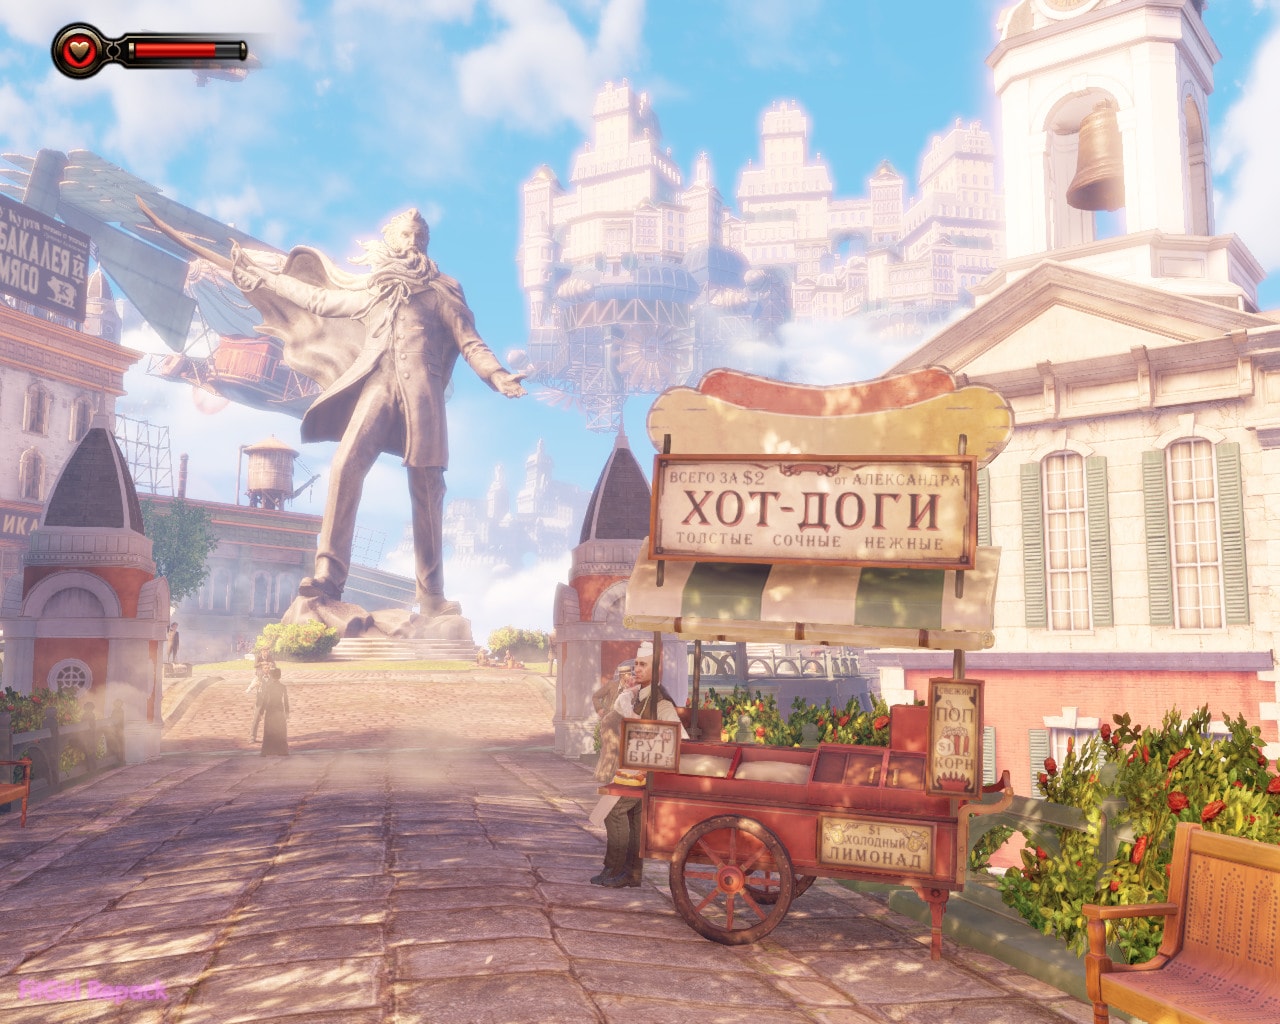 BioShock Infinite: The Complete Edition gameplay